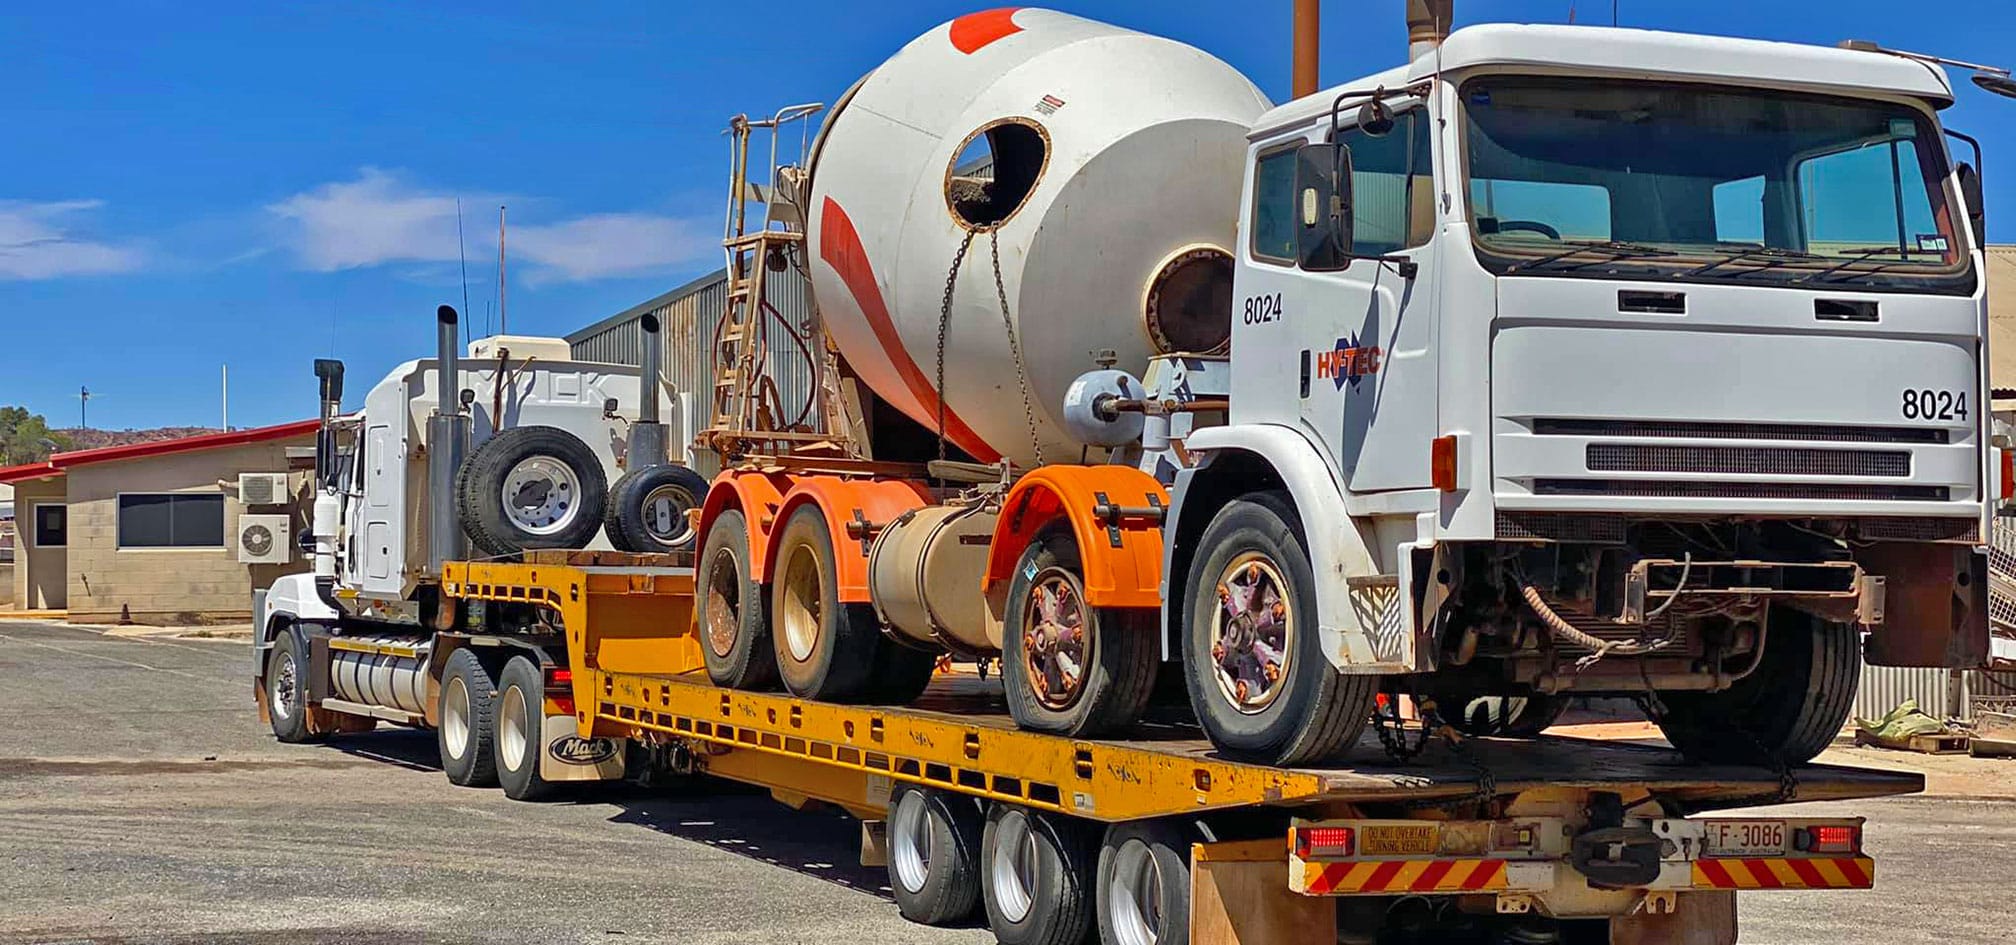 Tow truck towing cement truck NT